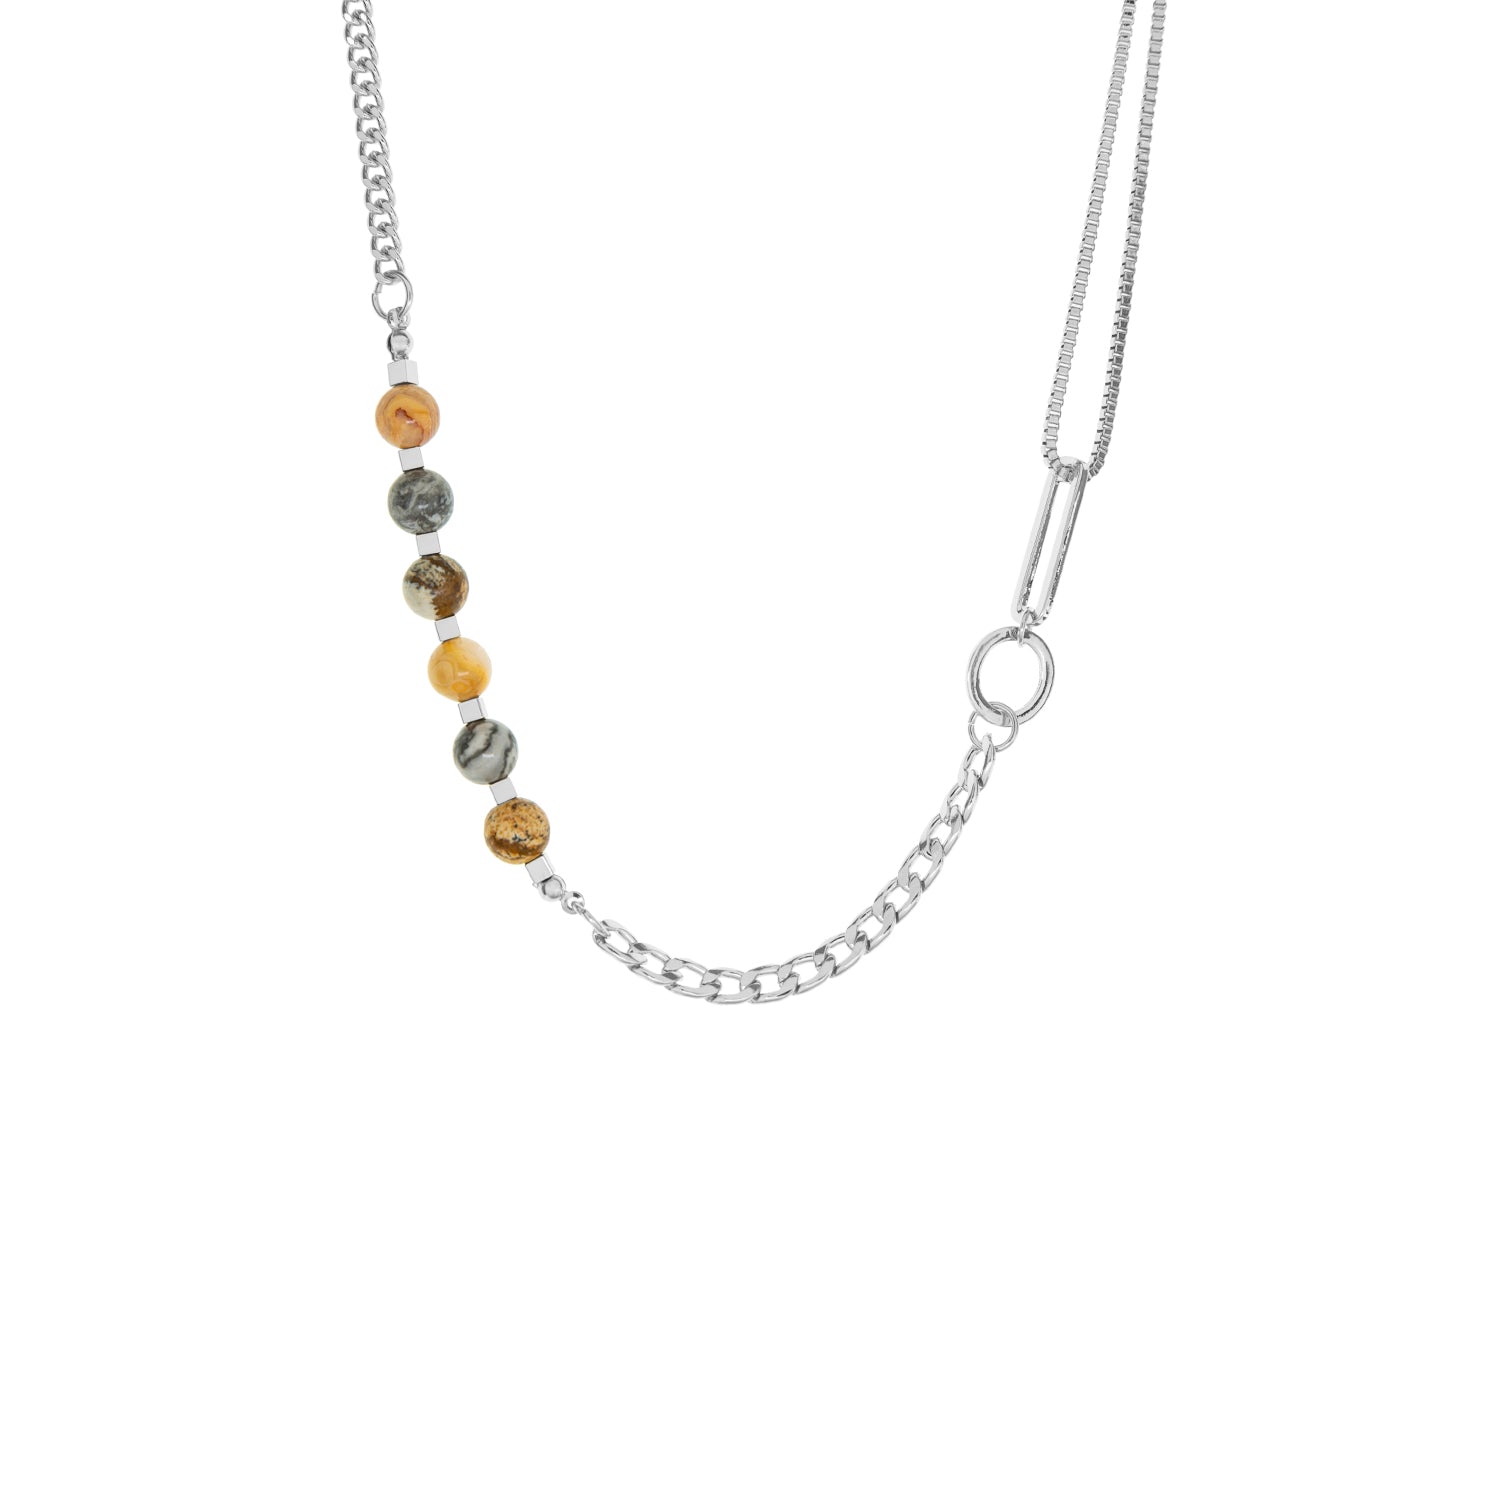 mixed link necklace with natural stones